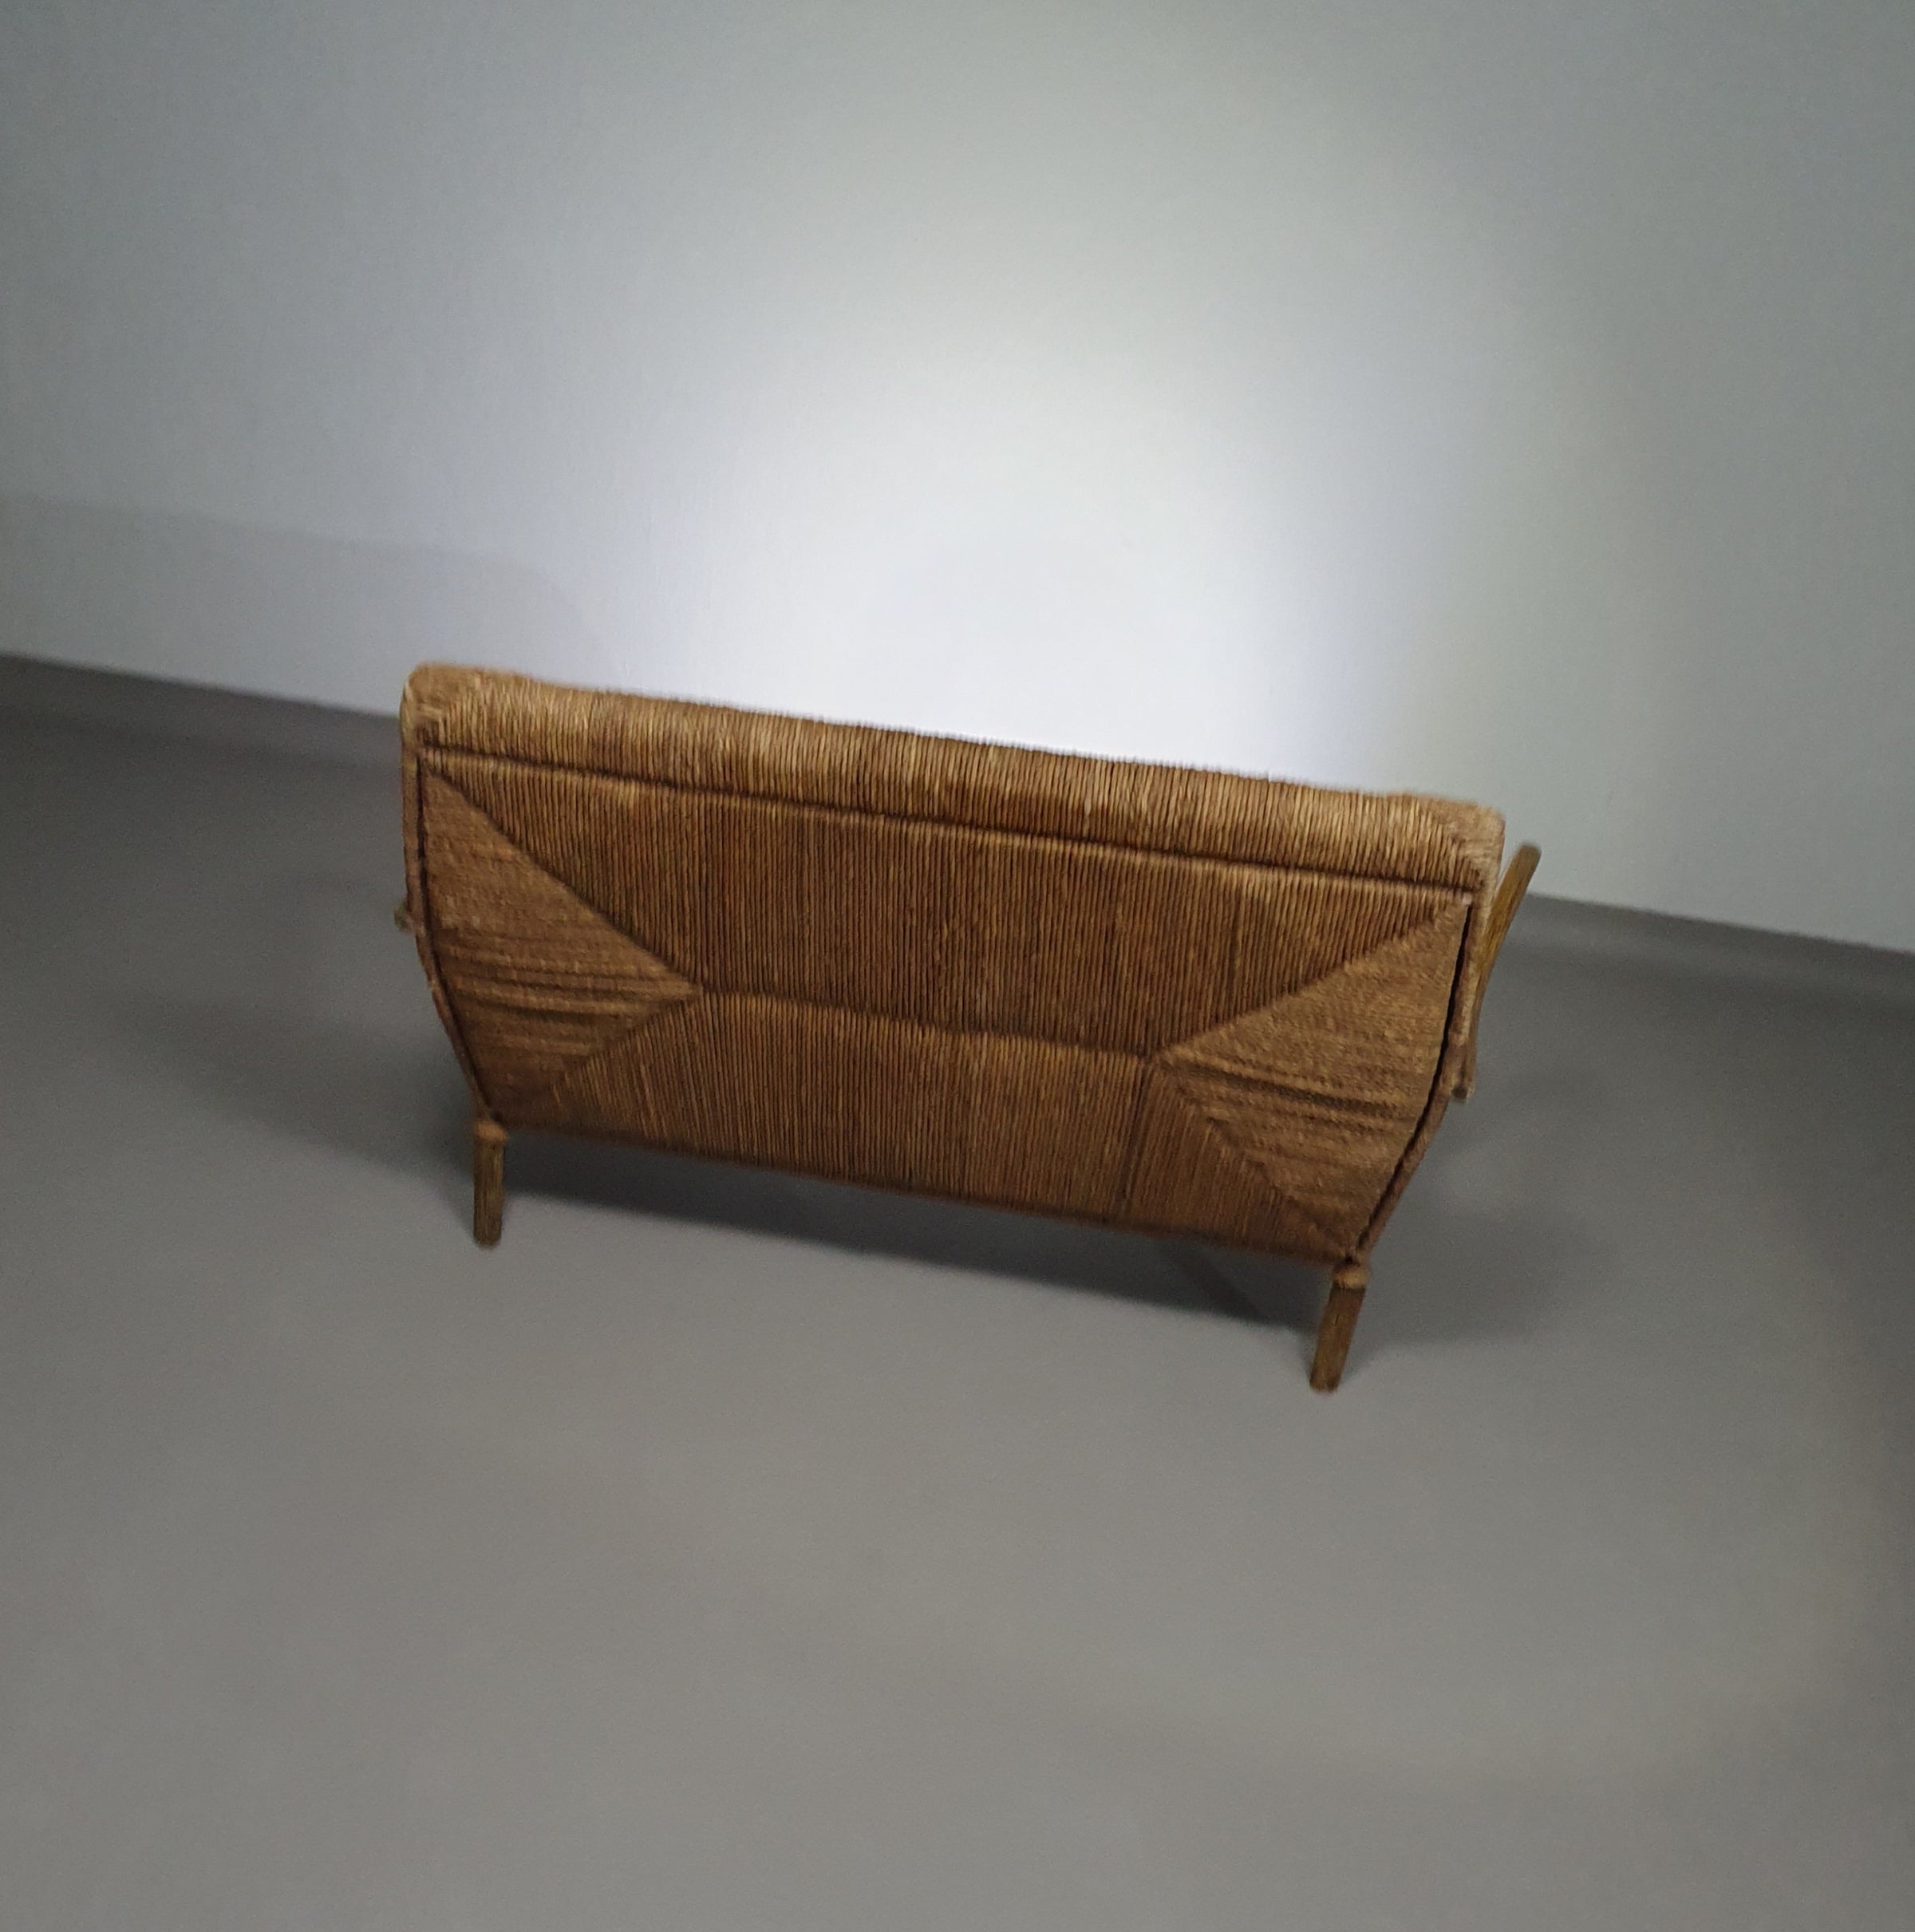 Vintage French papercord sofa with a metal frame base